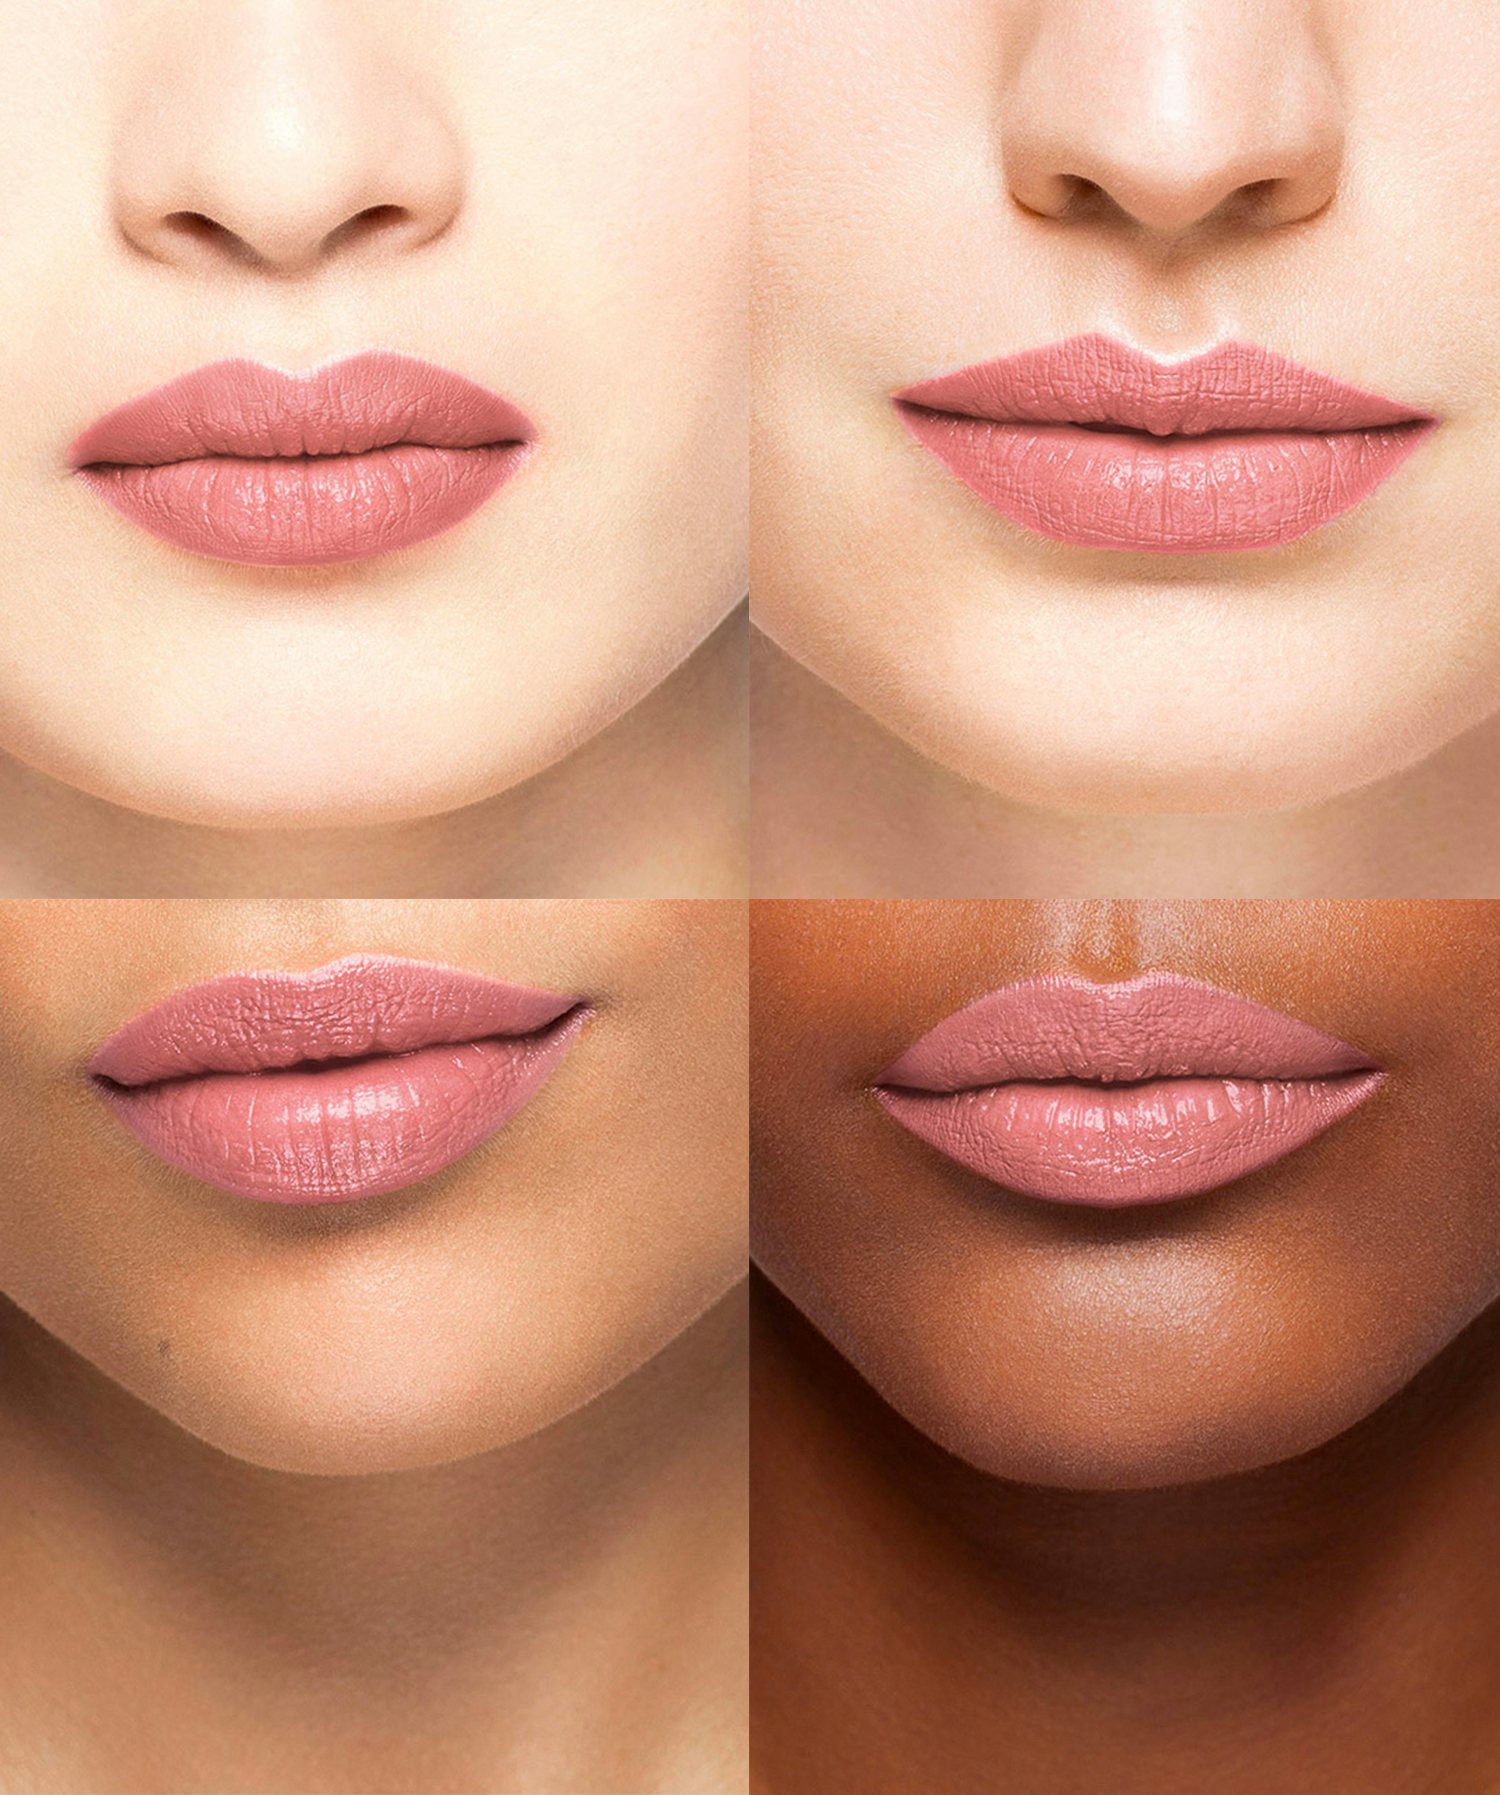 La bouche rouge Rosewood lipstick shade on different models with different skin tones